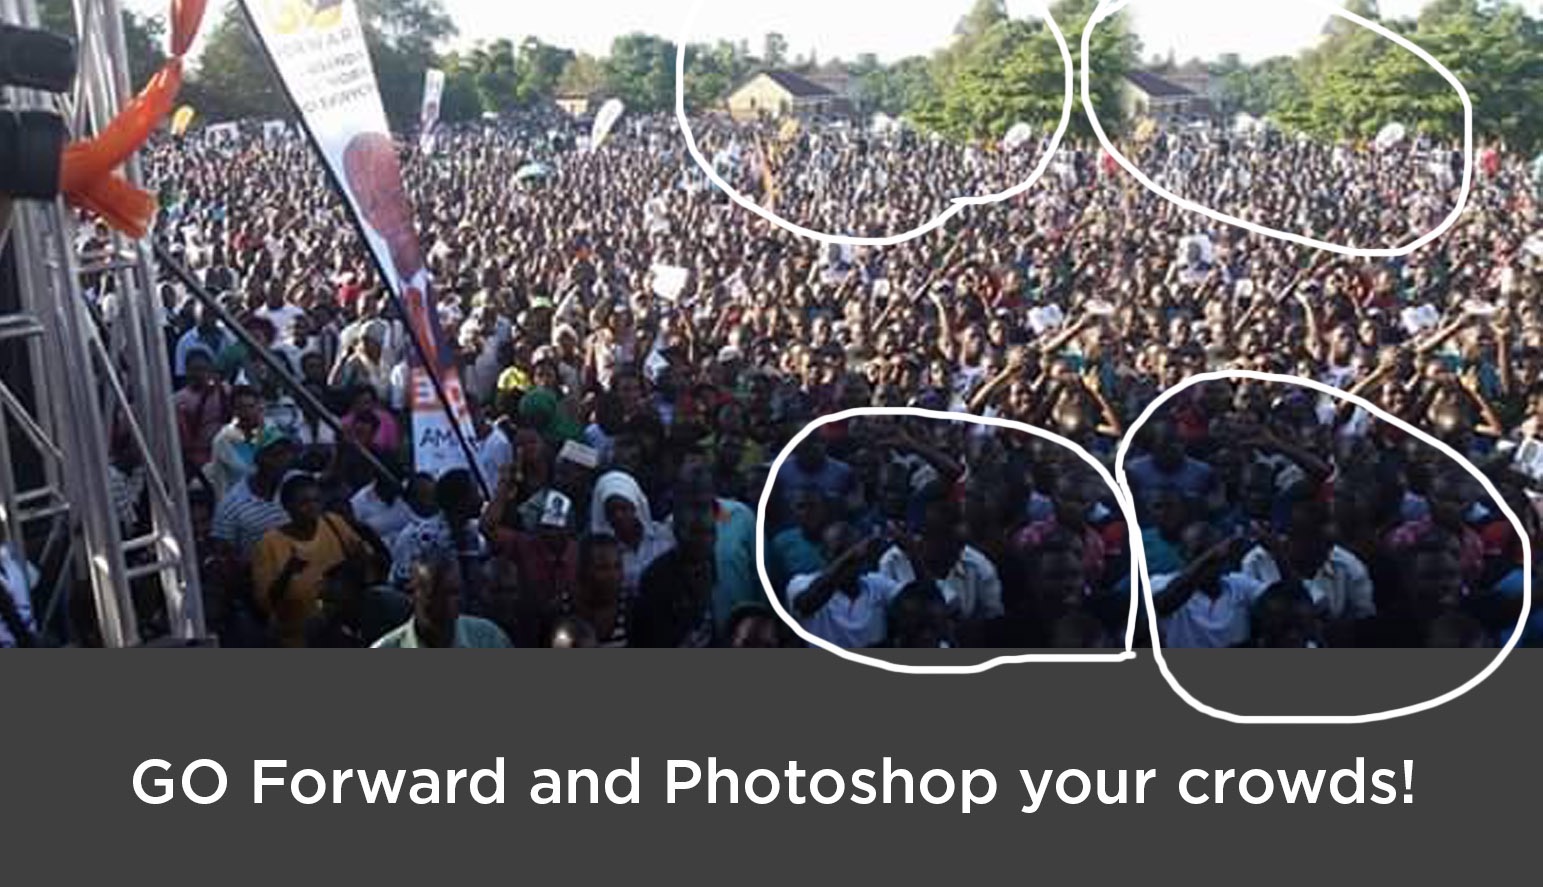 Social media is awash with "Photoshopped" photos of crowds, but with a keen eye you can be able to identify the fakes, like this one.